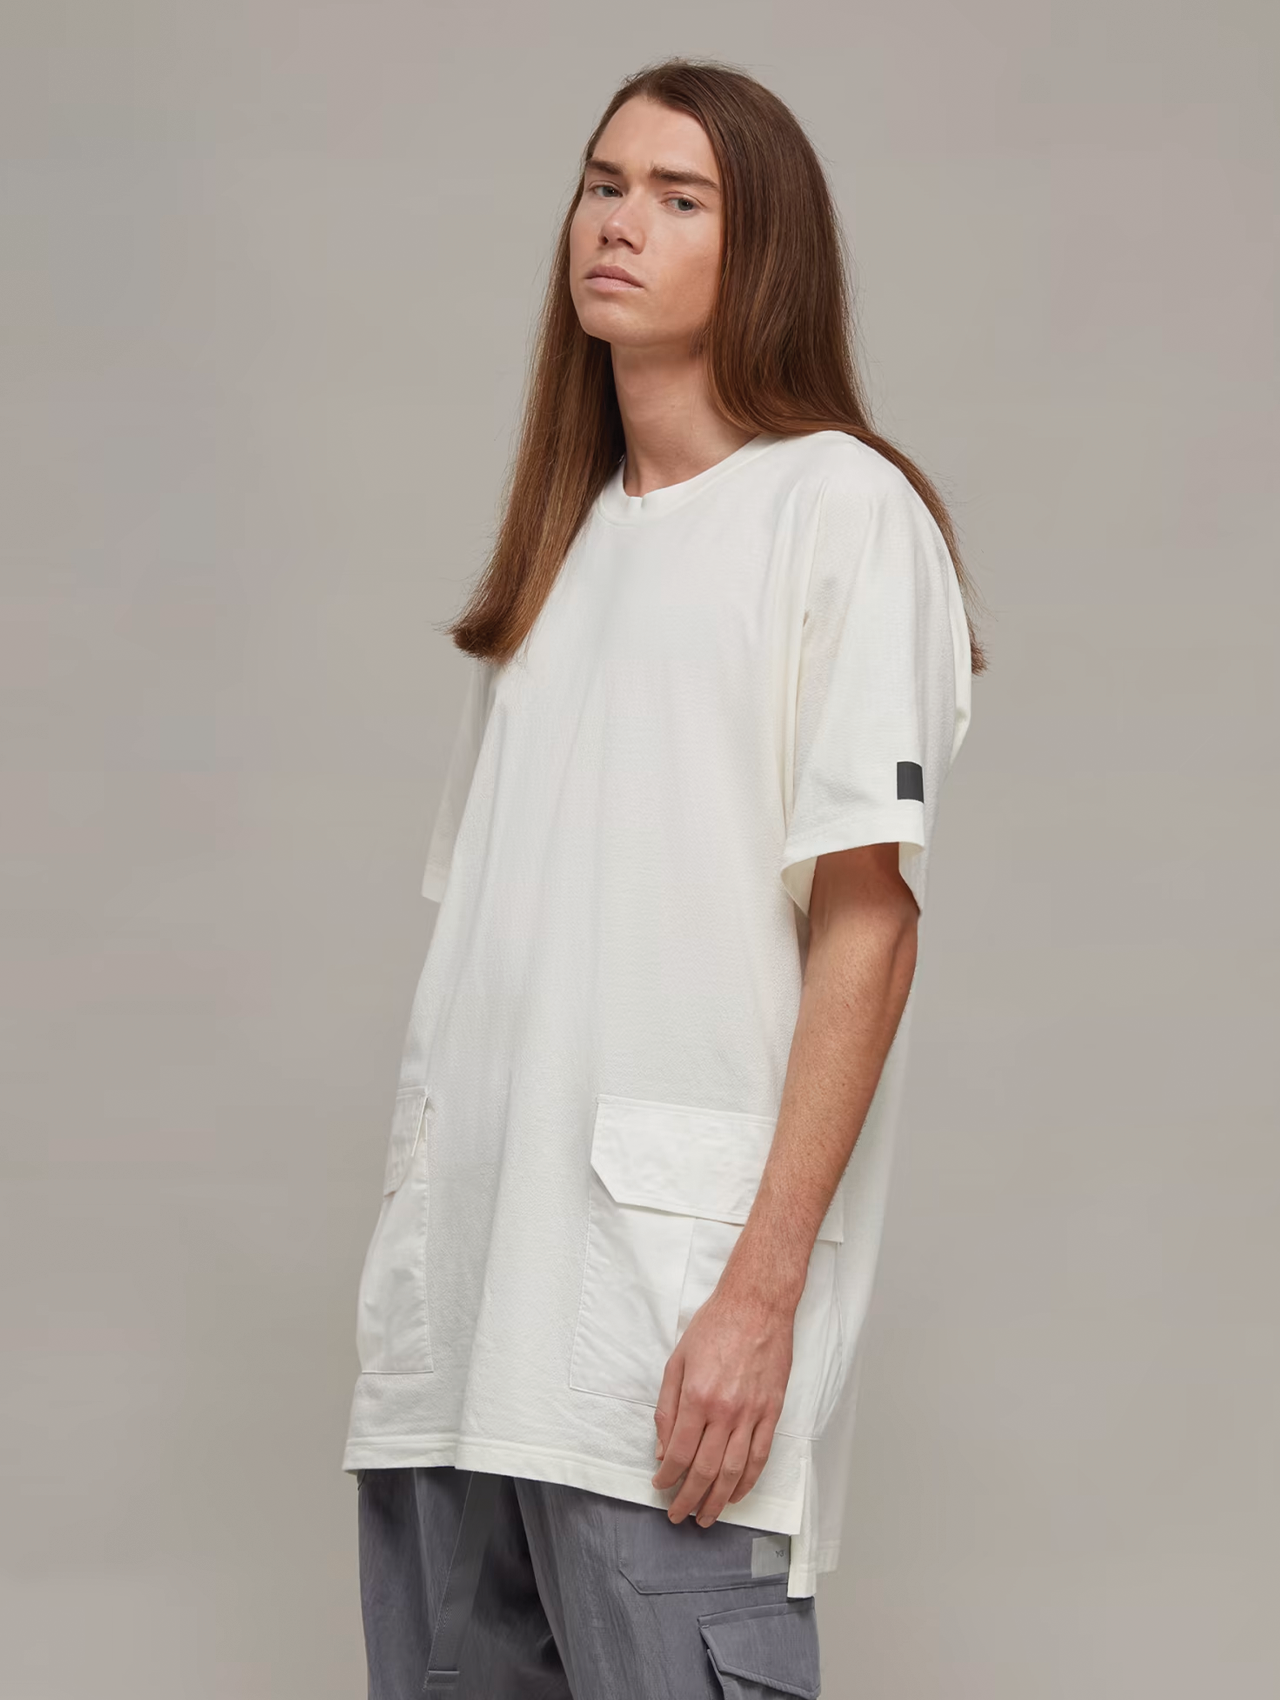 Y-3 Off White Crepe Jersey Pocket T-Shirt